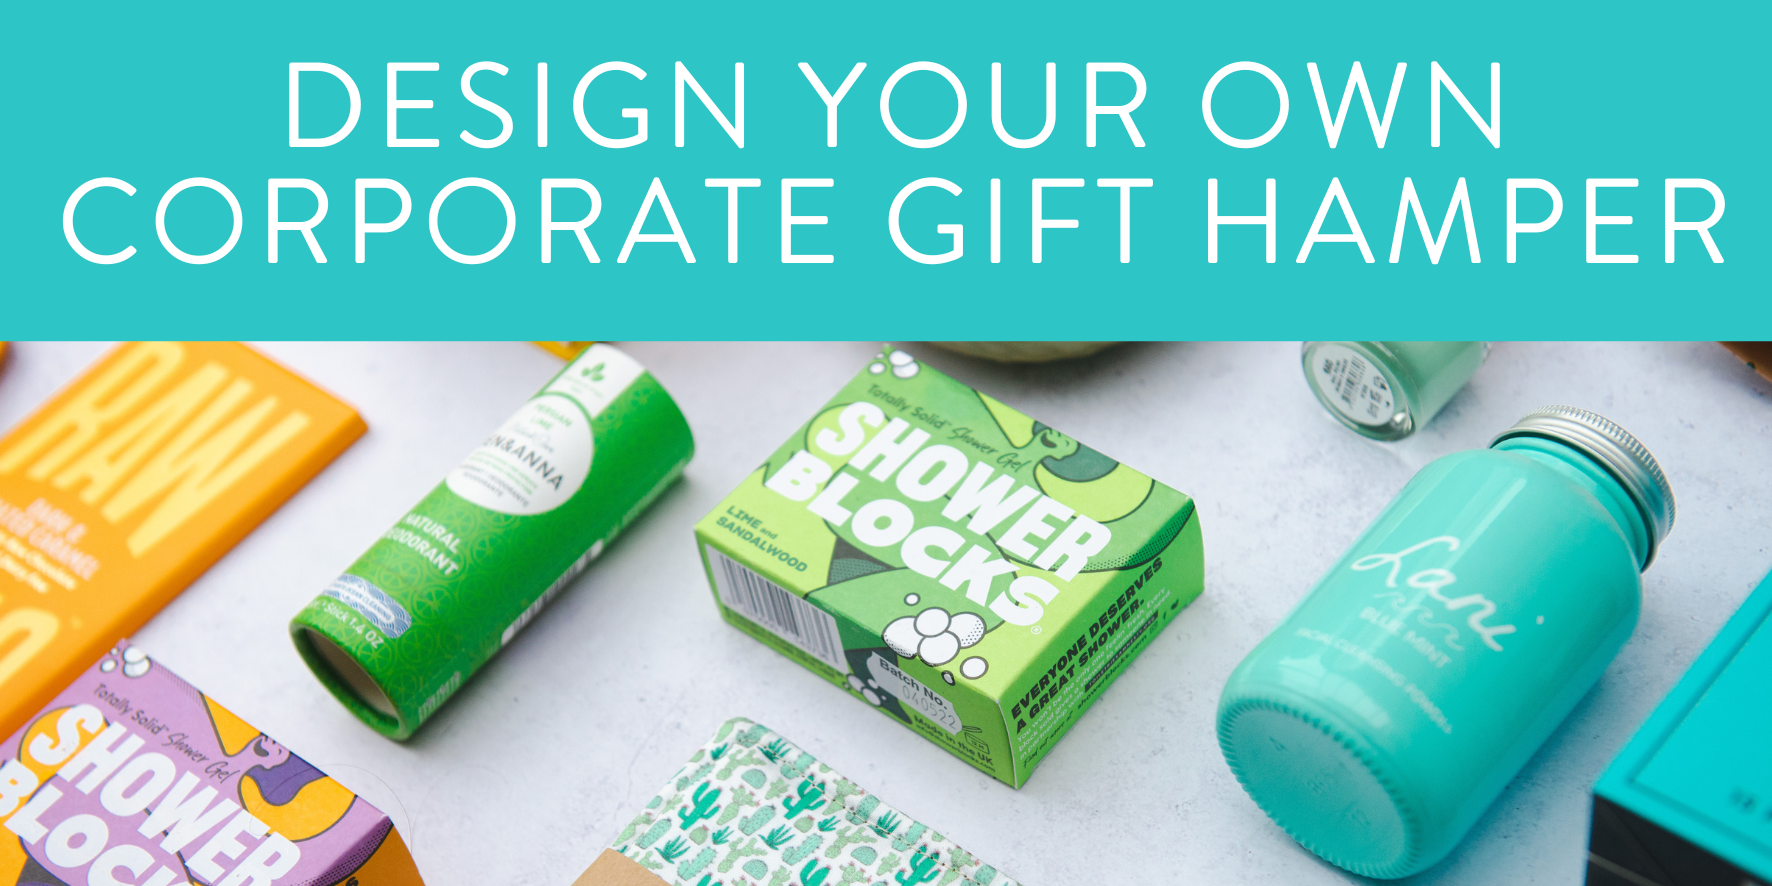 Design your own corporate gift hamper